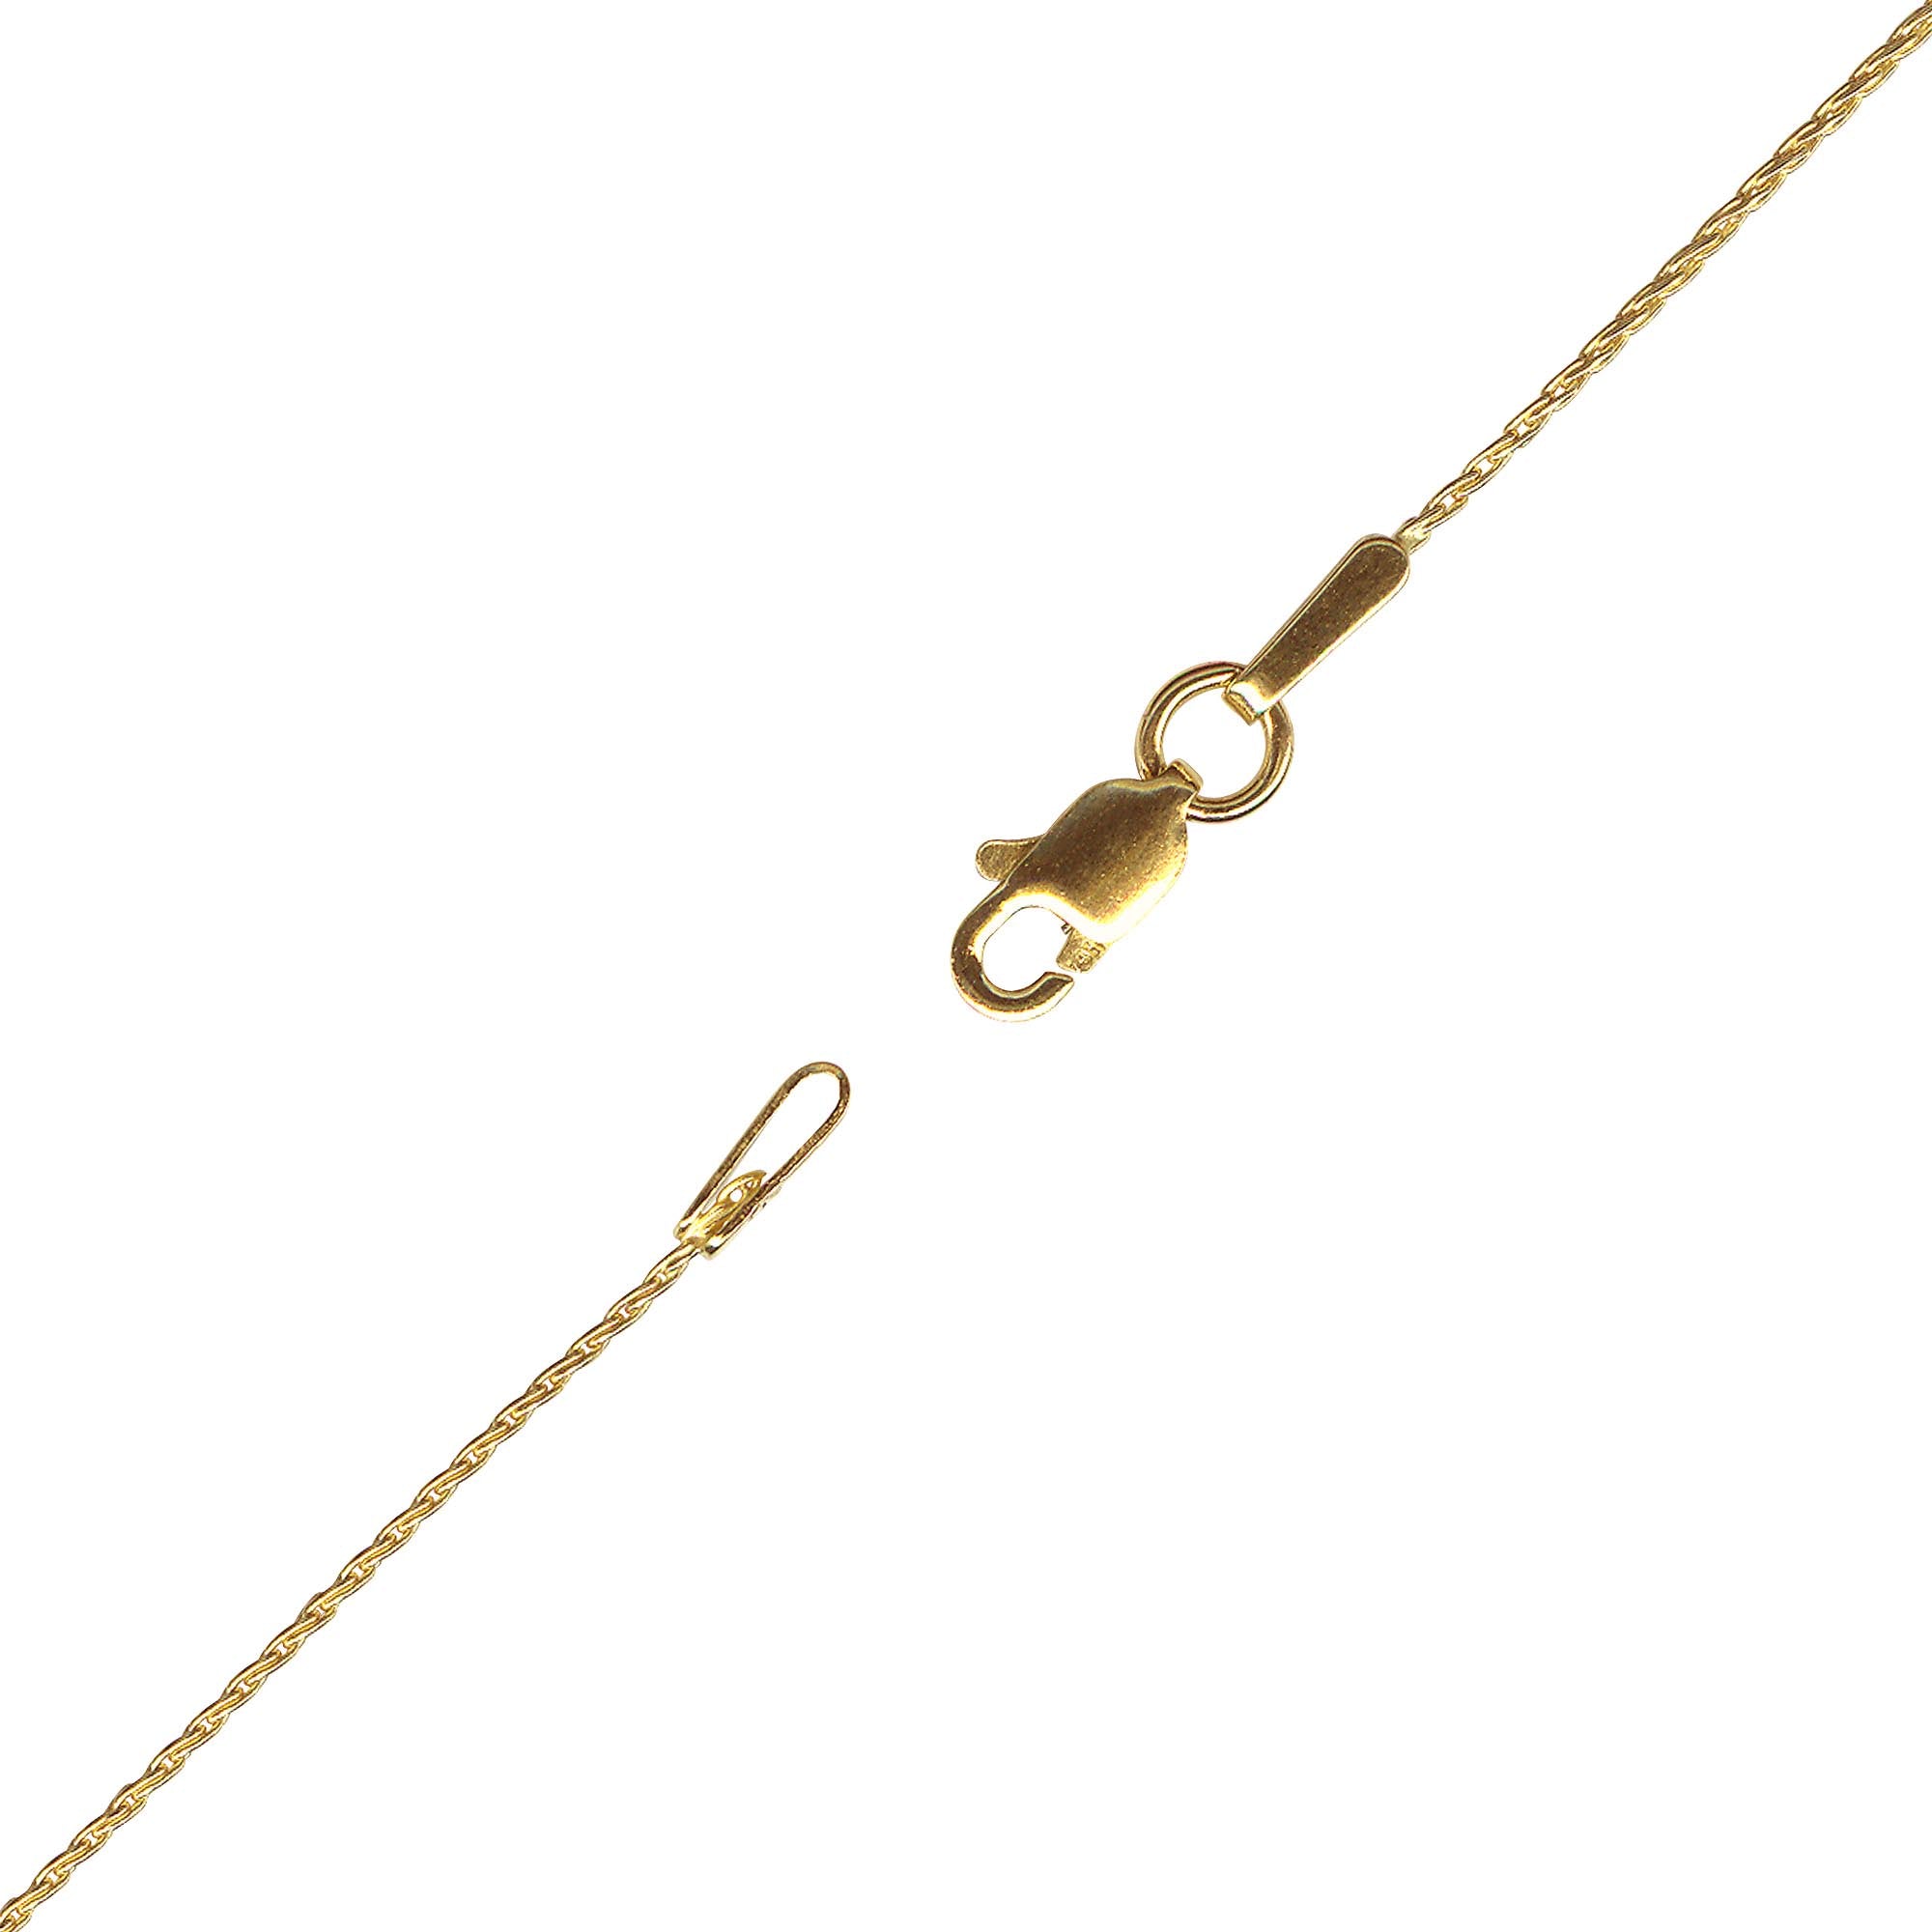 Parisian Wheat Chain in 14kt Yellow Gold (20 inches and 1.4mm wide)